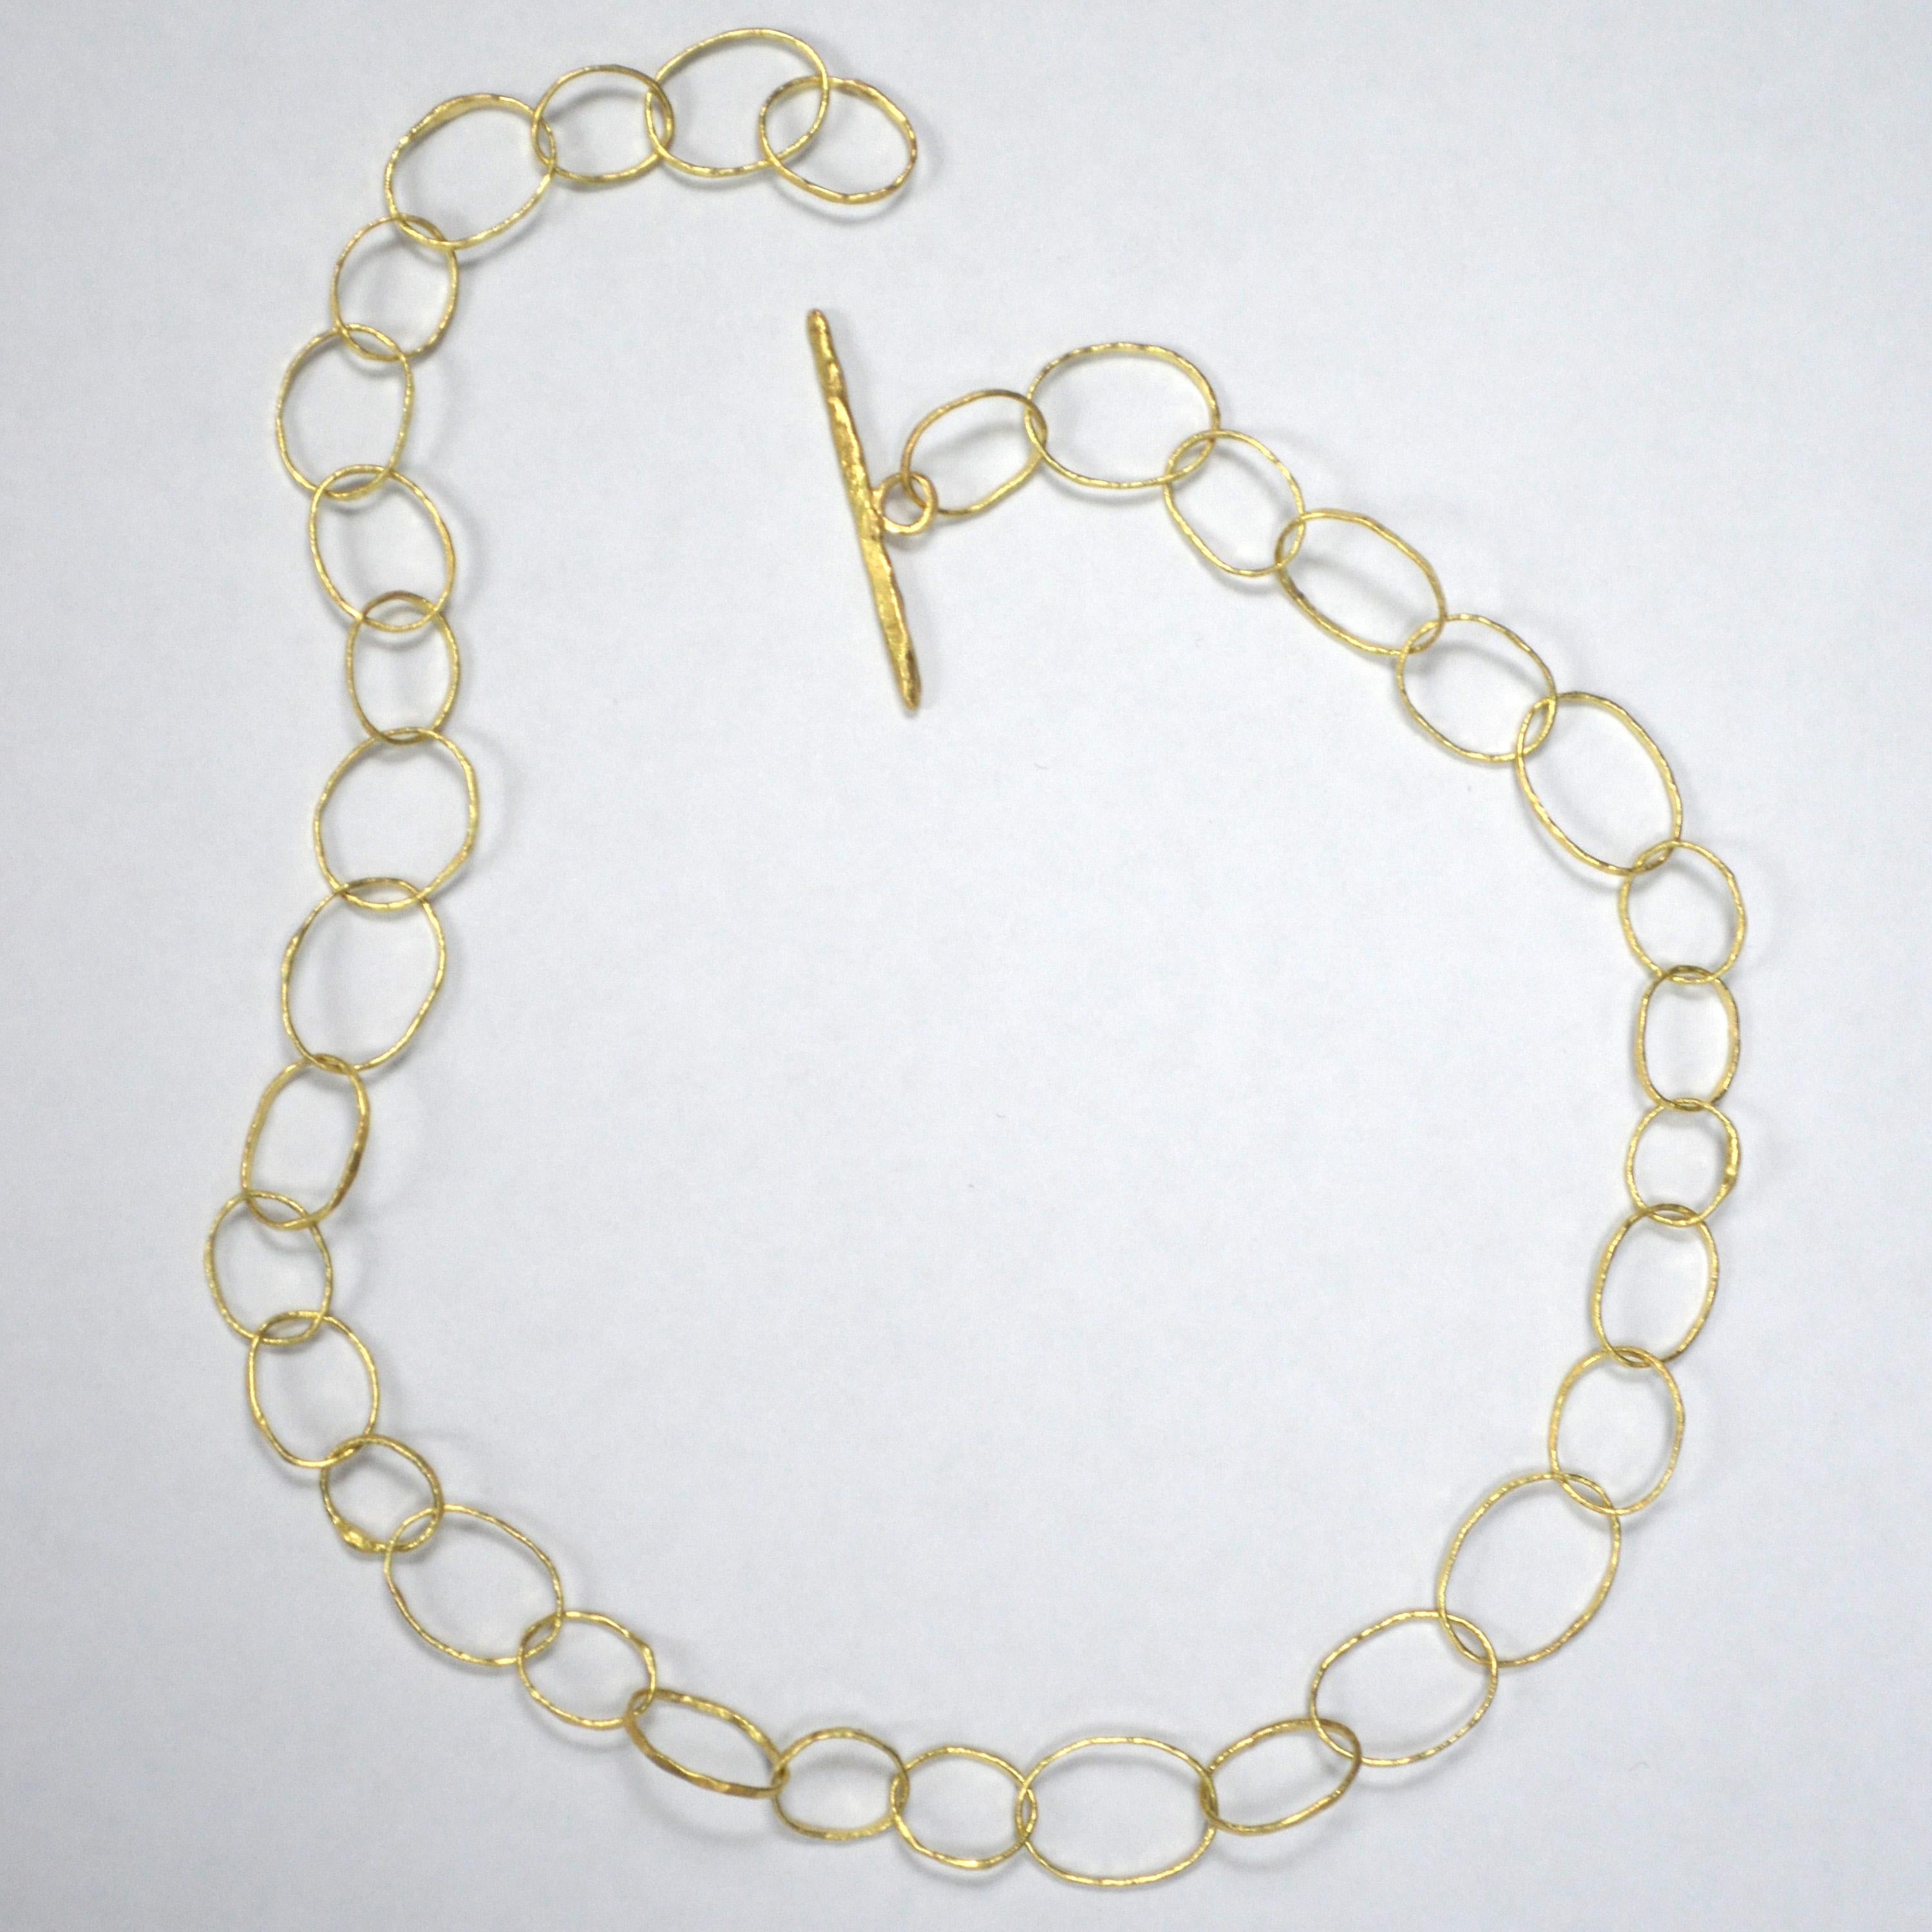 18k yellow gold Necklace handmade by London Goldsmith Disa Allsopp. 

Made from 18k yellow gold, each link on the necklace has been individually formed and hammered to create a warm textured glow. Each link is unique and the varying sizes of each